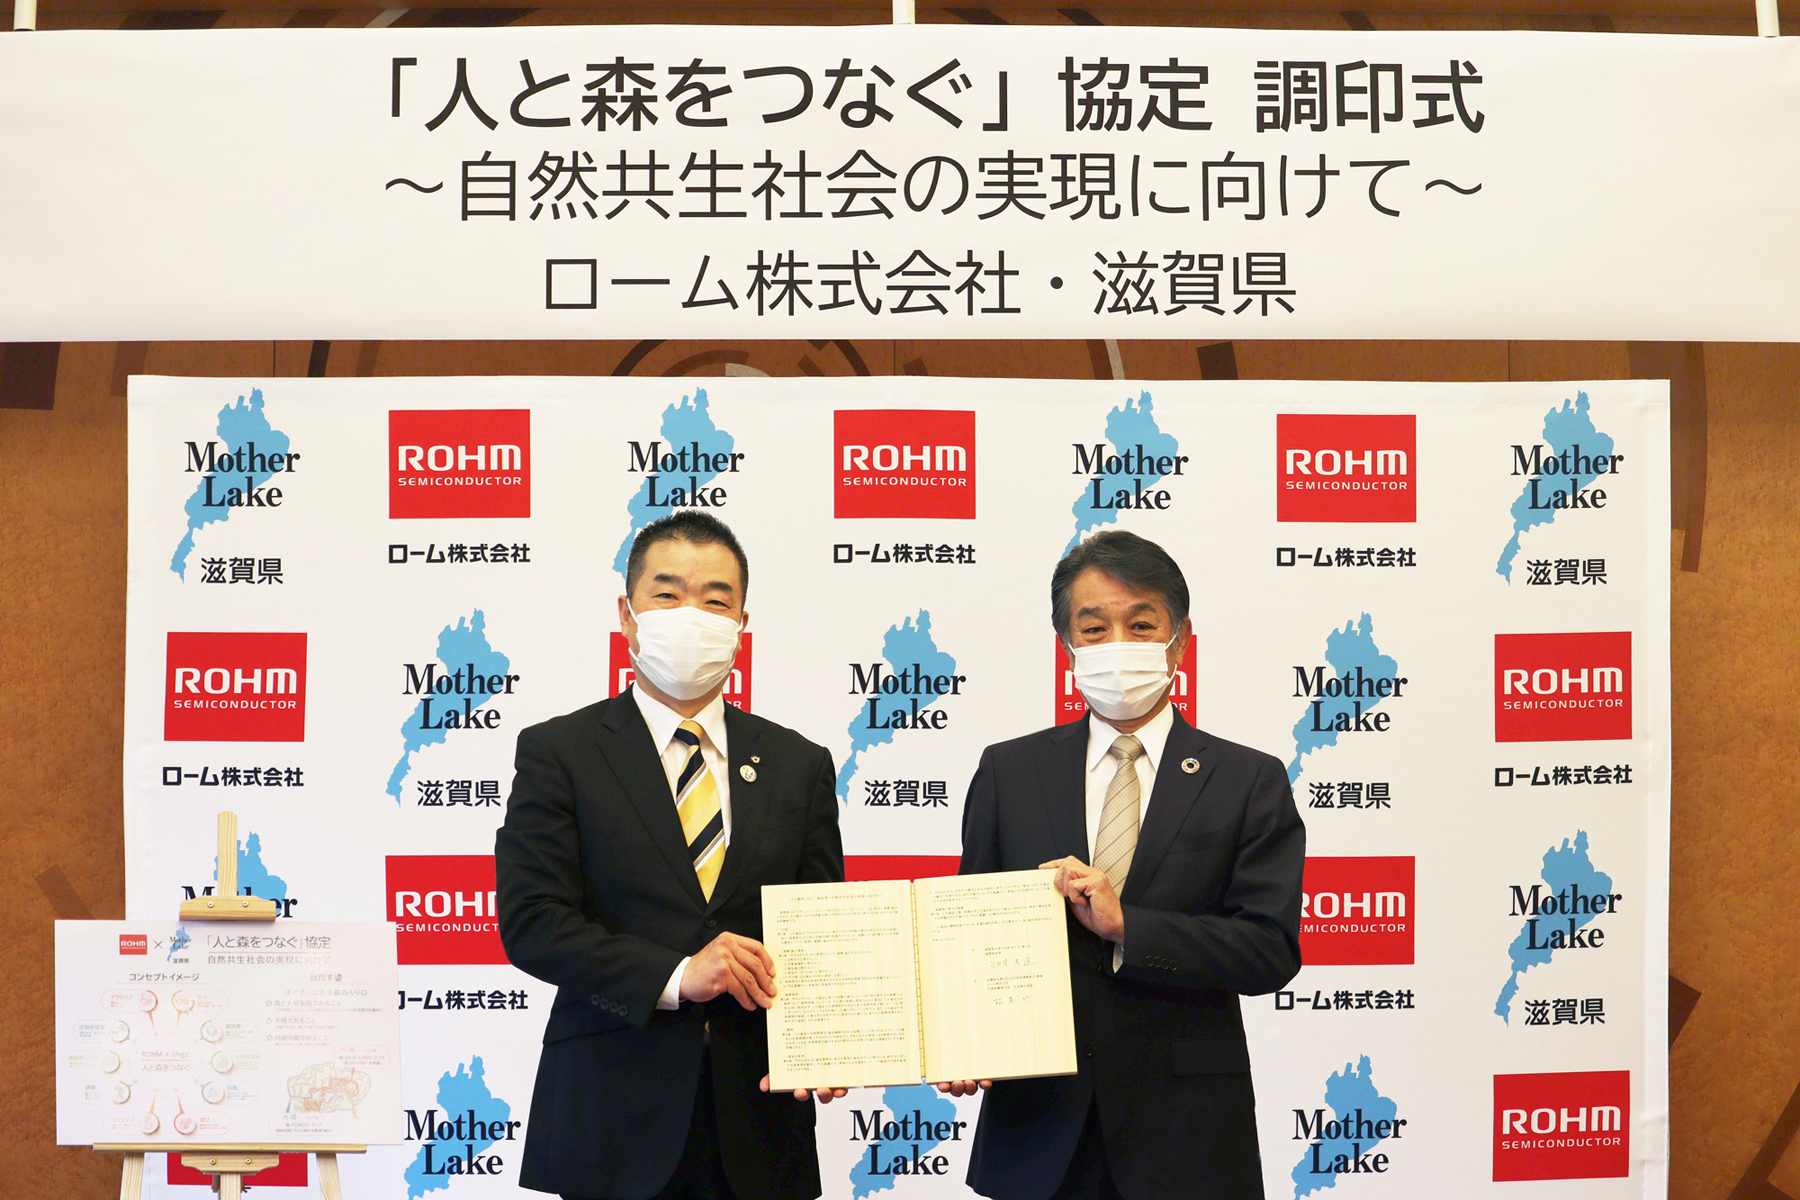 Concluded an agreement with Shiga Prefecture to ‘connect people and forests’